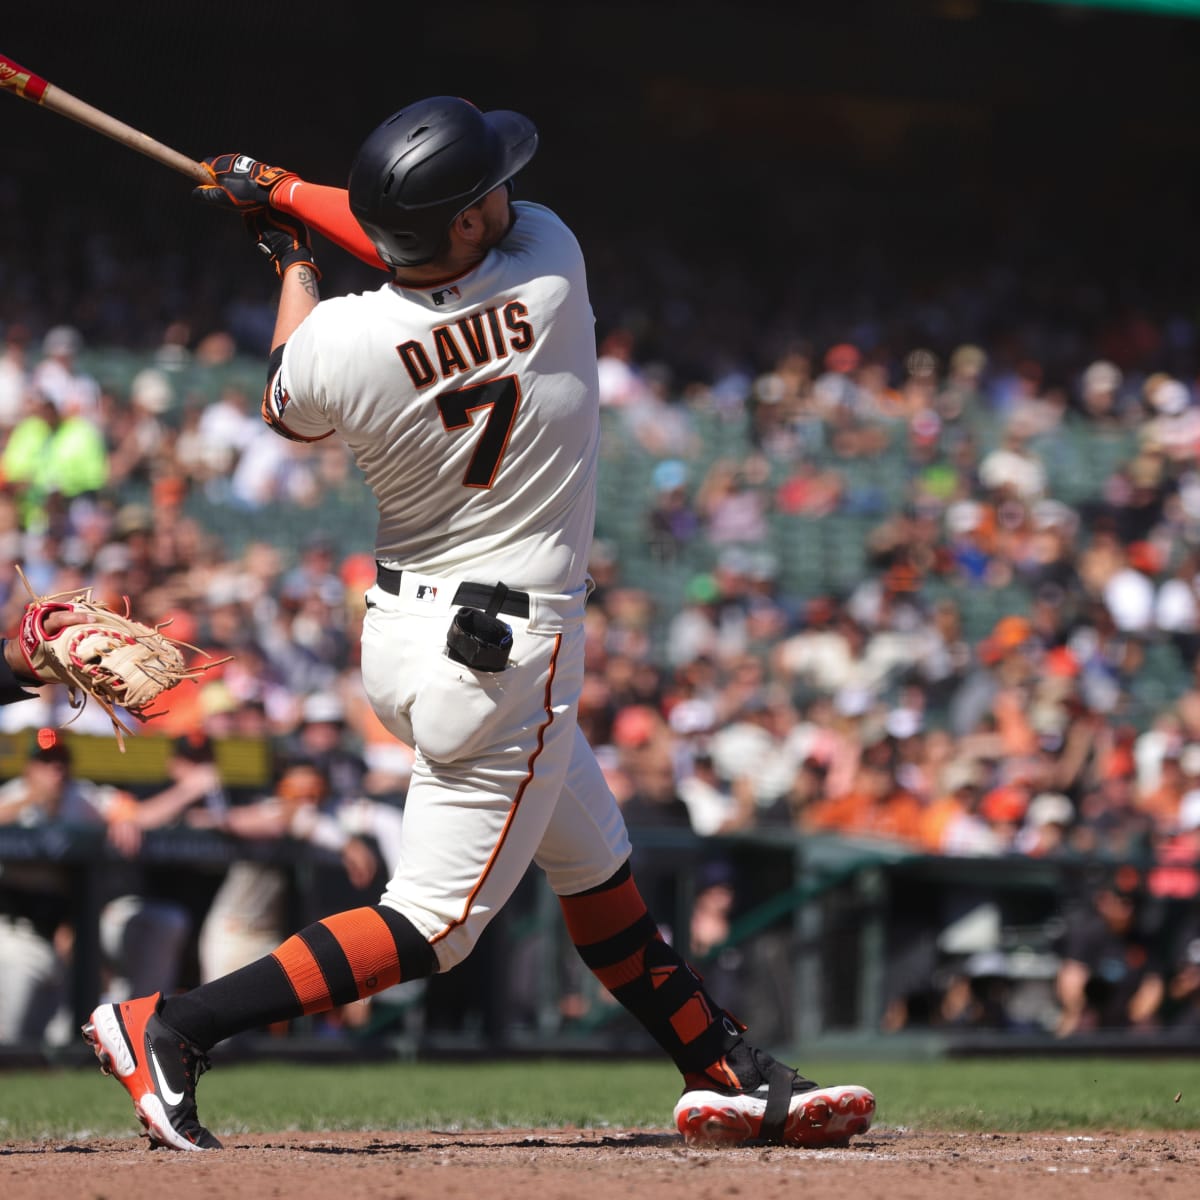 Giants-Rockies Series Preview: The Rockies have been real bad on the road,  but they're probably due for a surprise - McCovey Chronicles